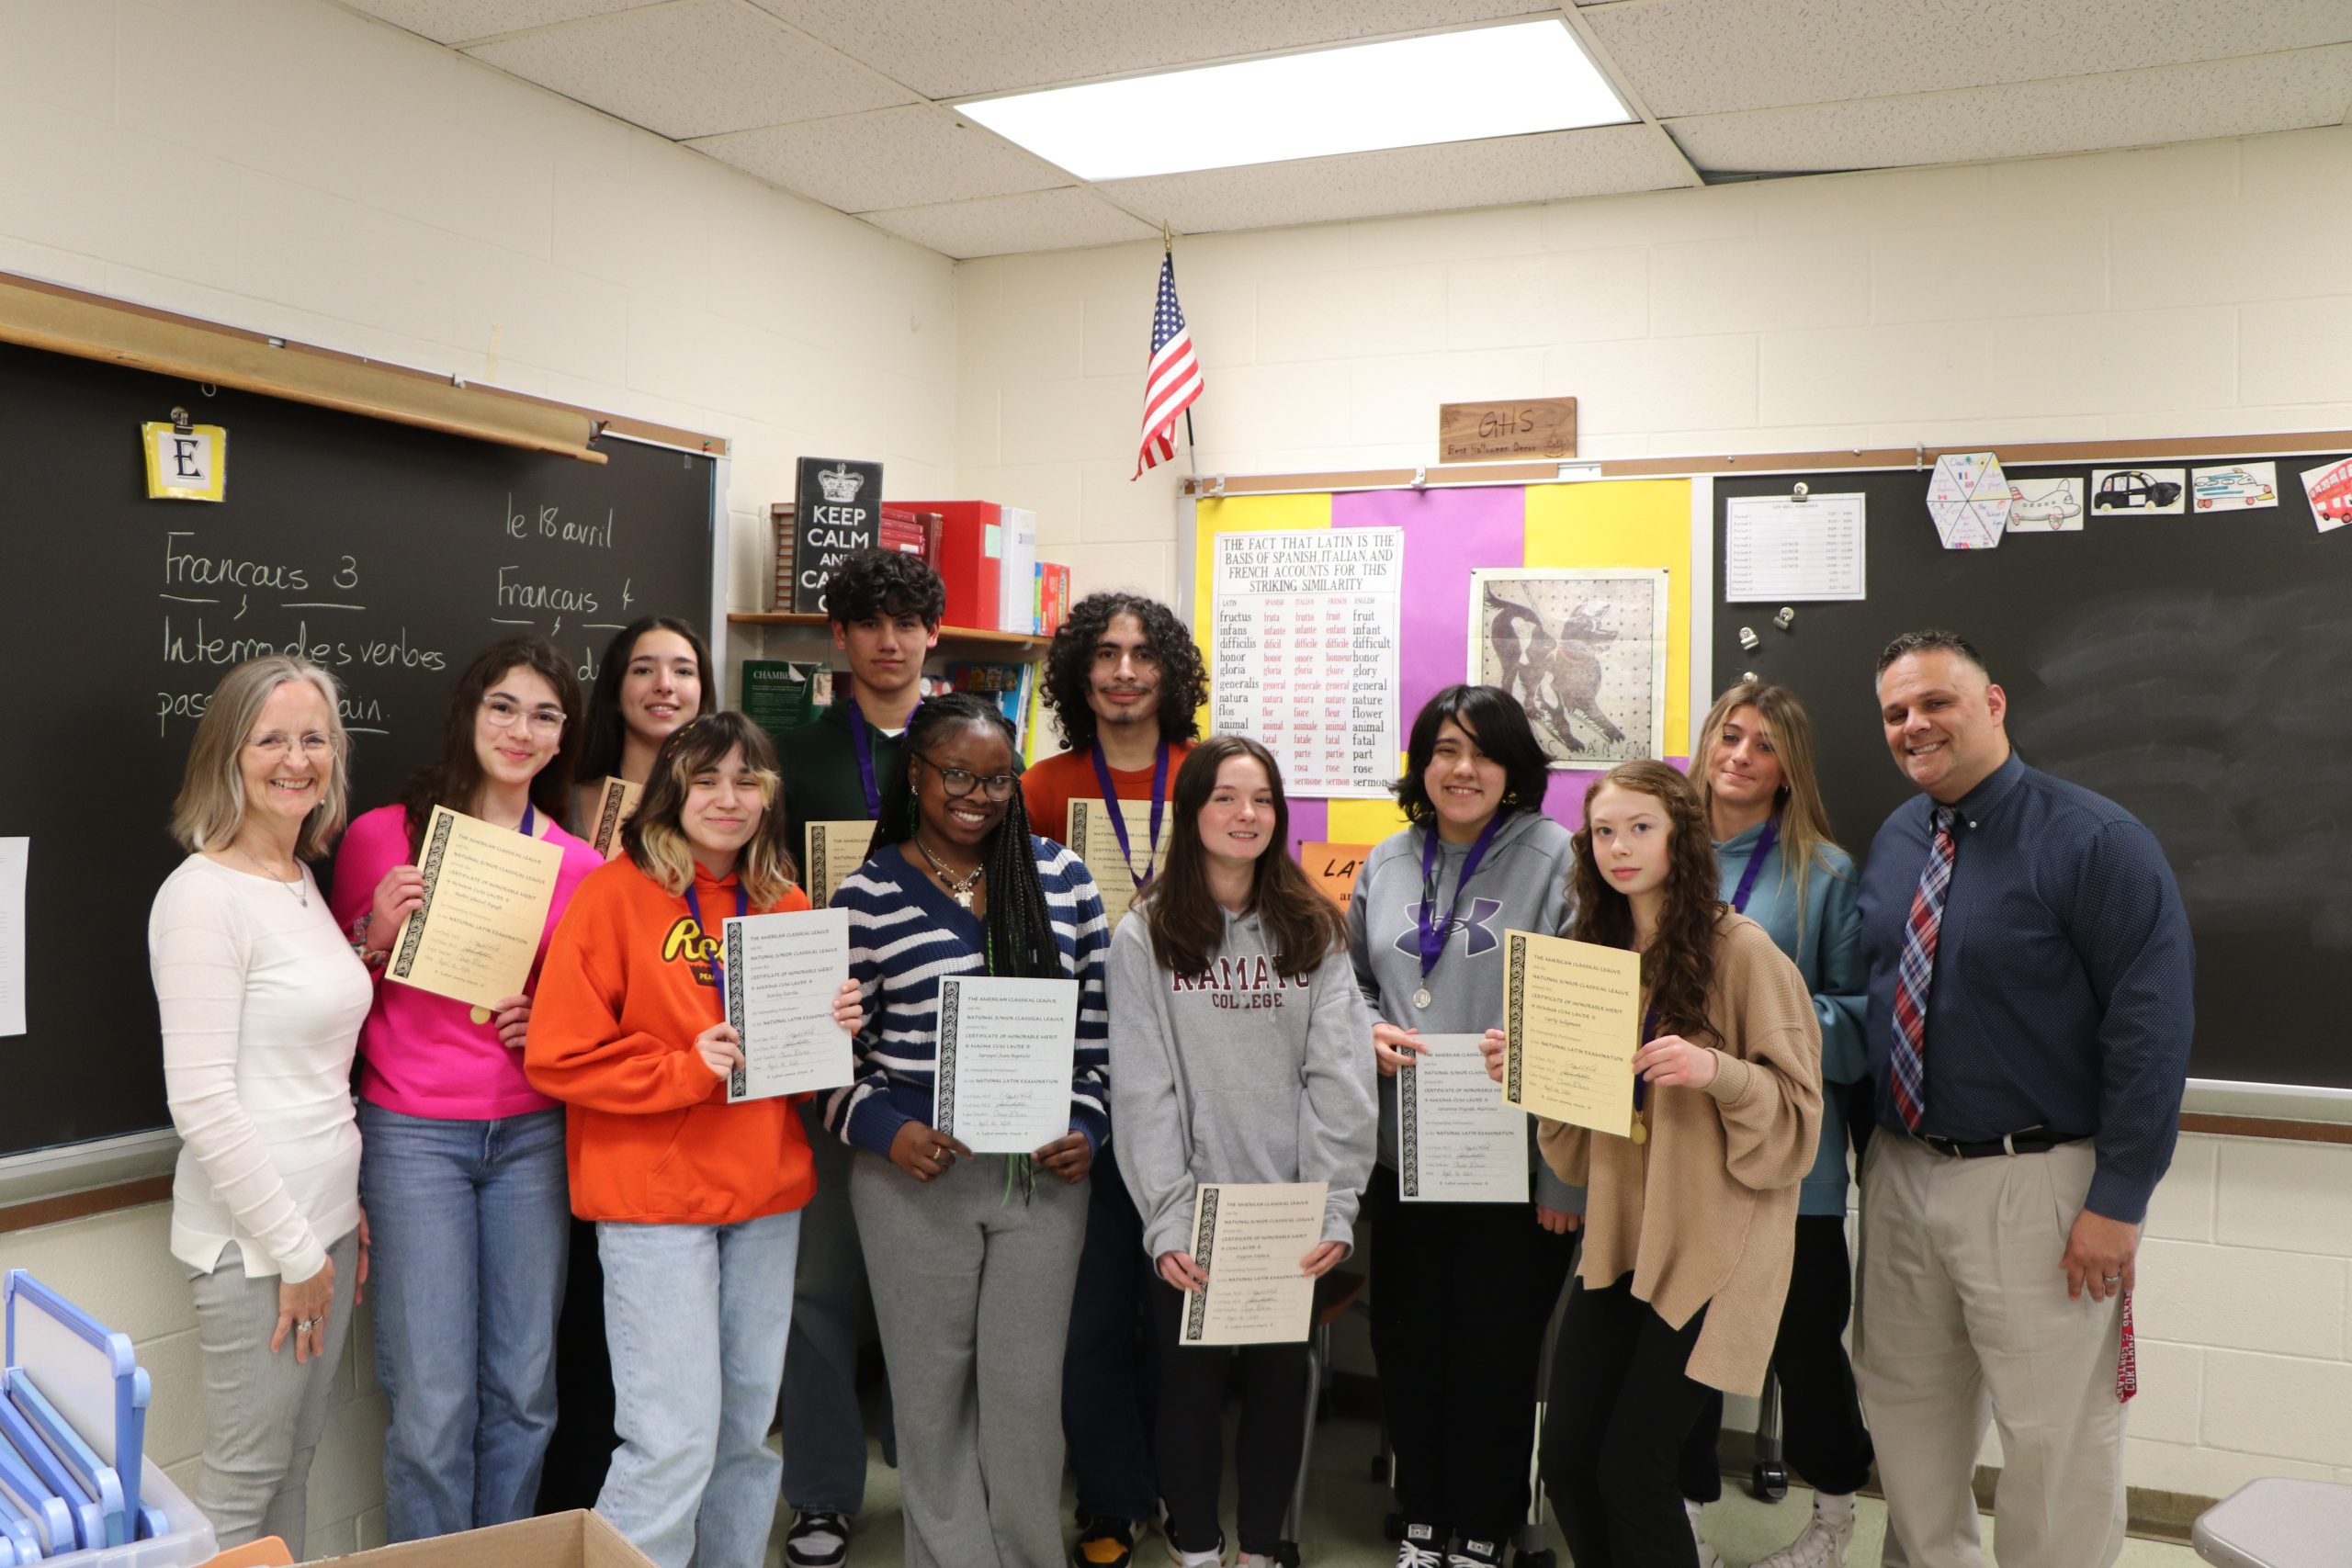 A group of high school students stand holding certificates and wearing medals with two adults in a classroom with posters and writing in Latin and French behind them.